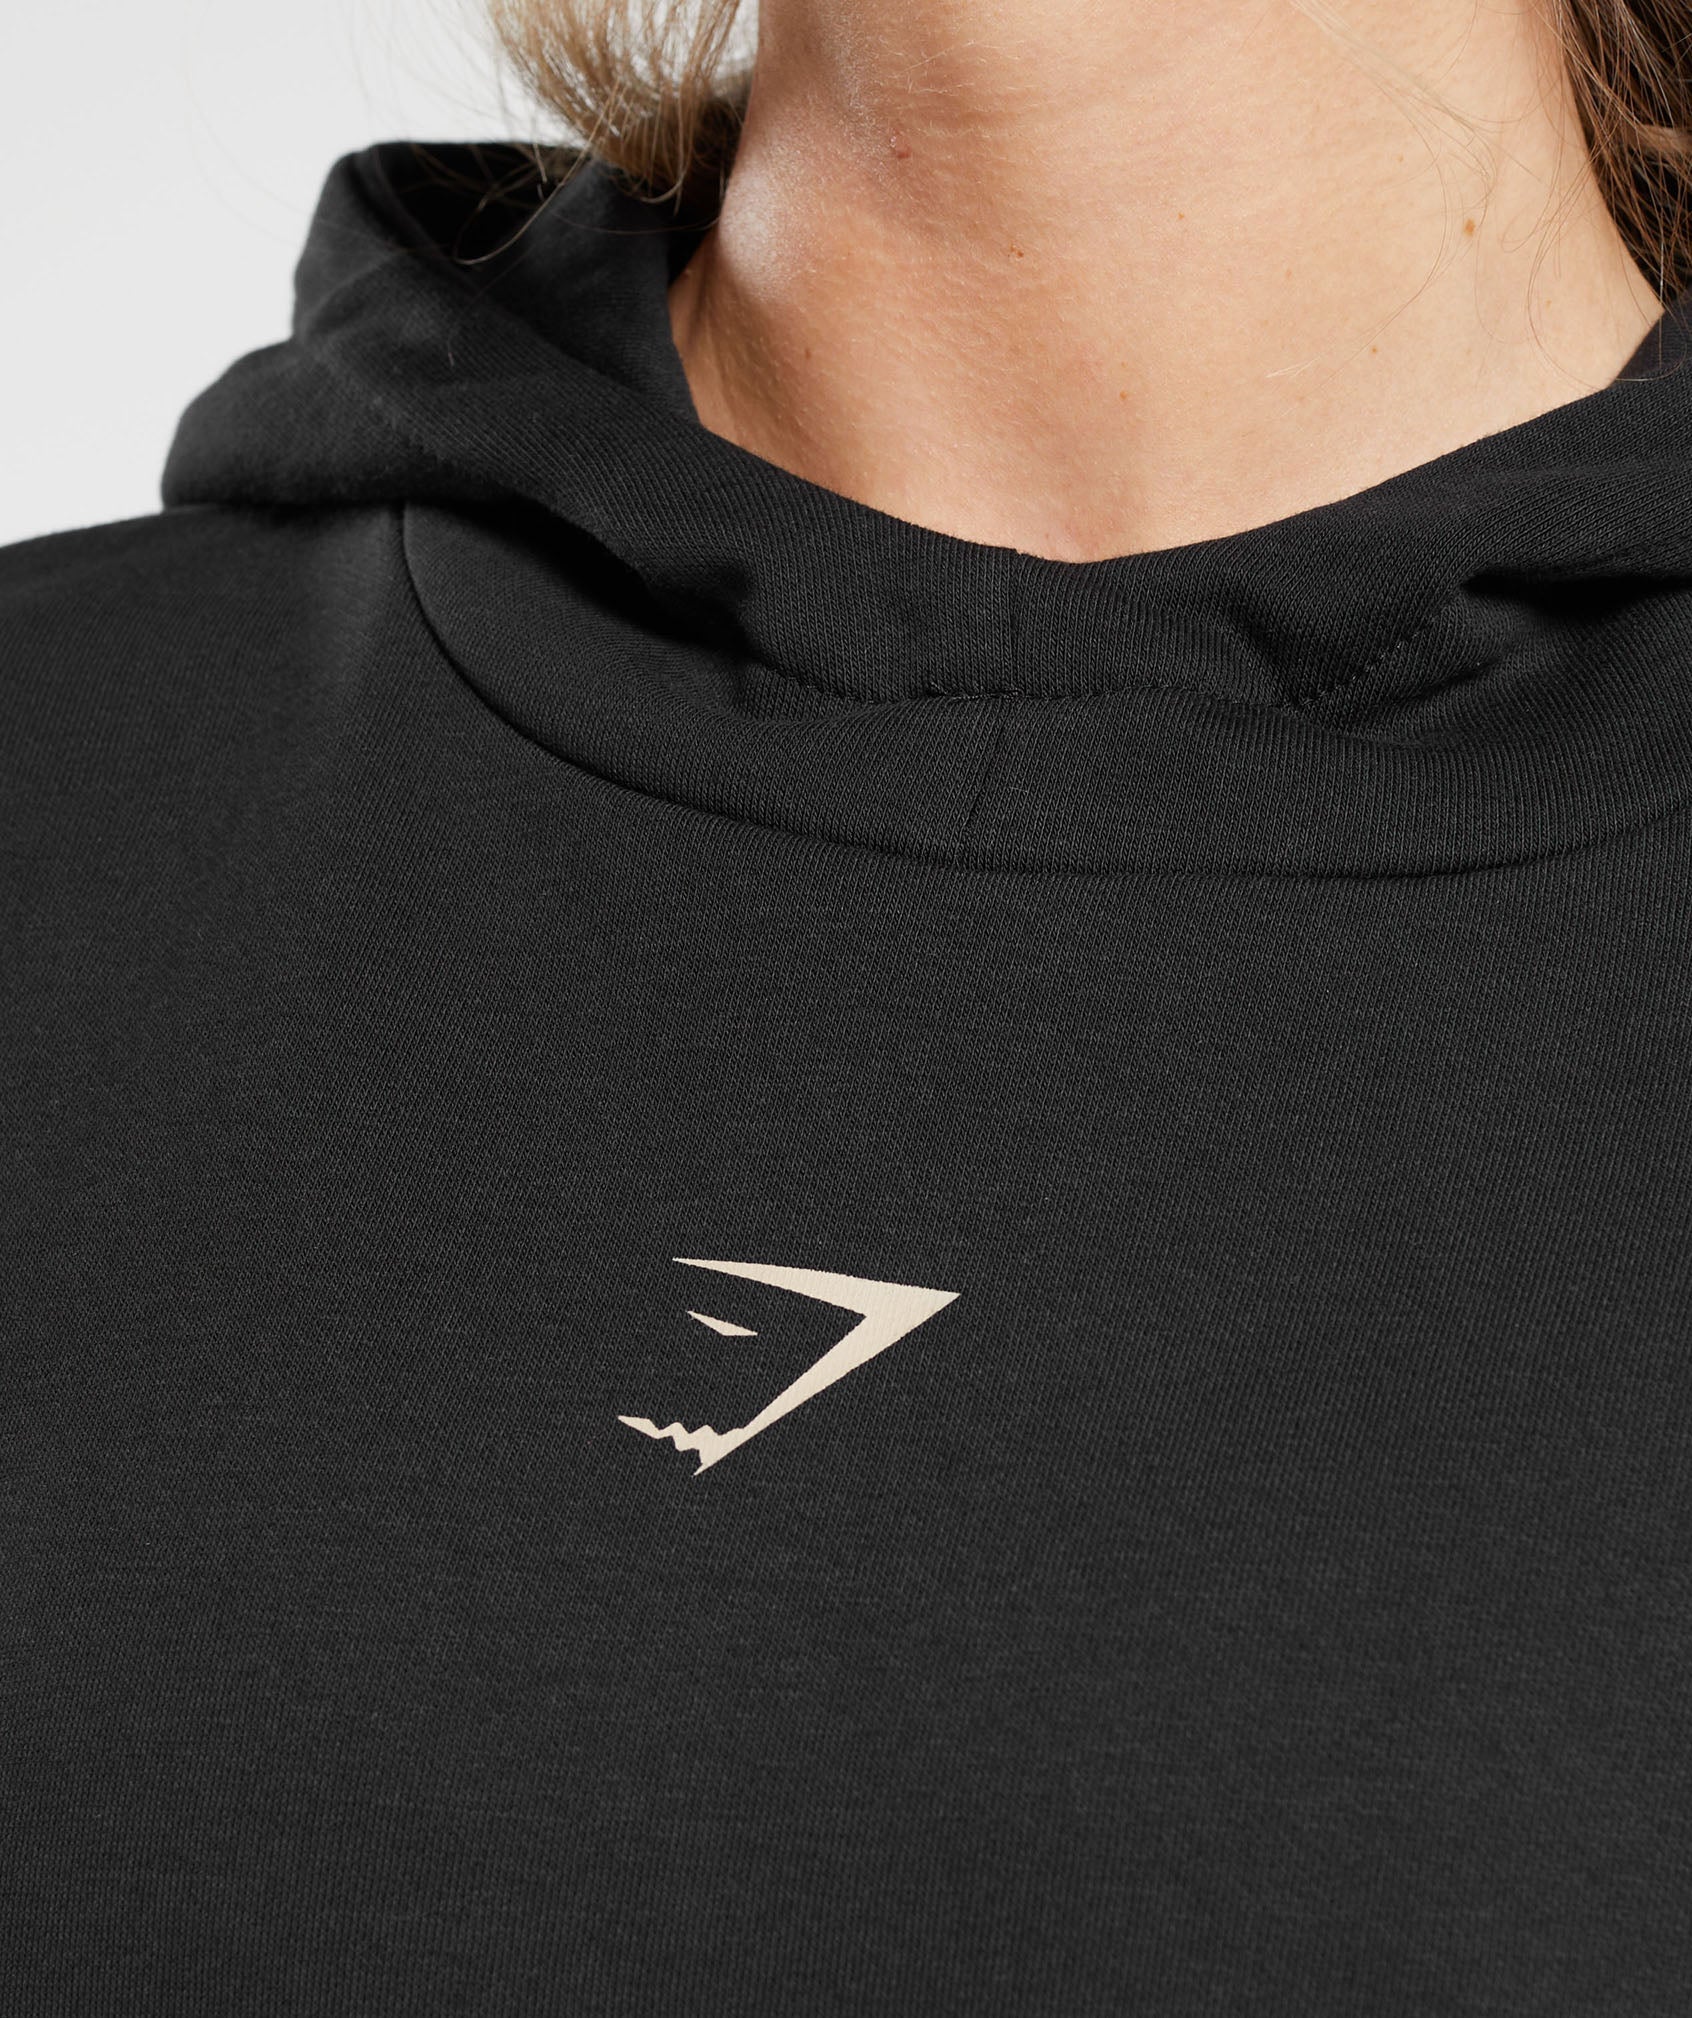 Committed To The Craft Hoodie in Black - view 3